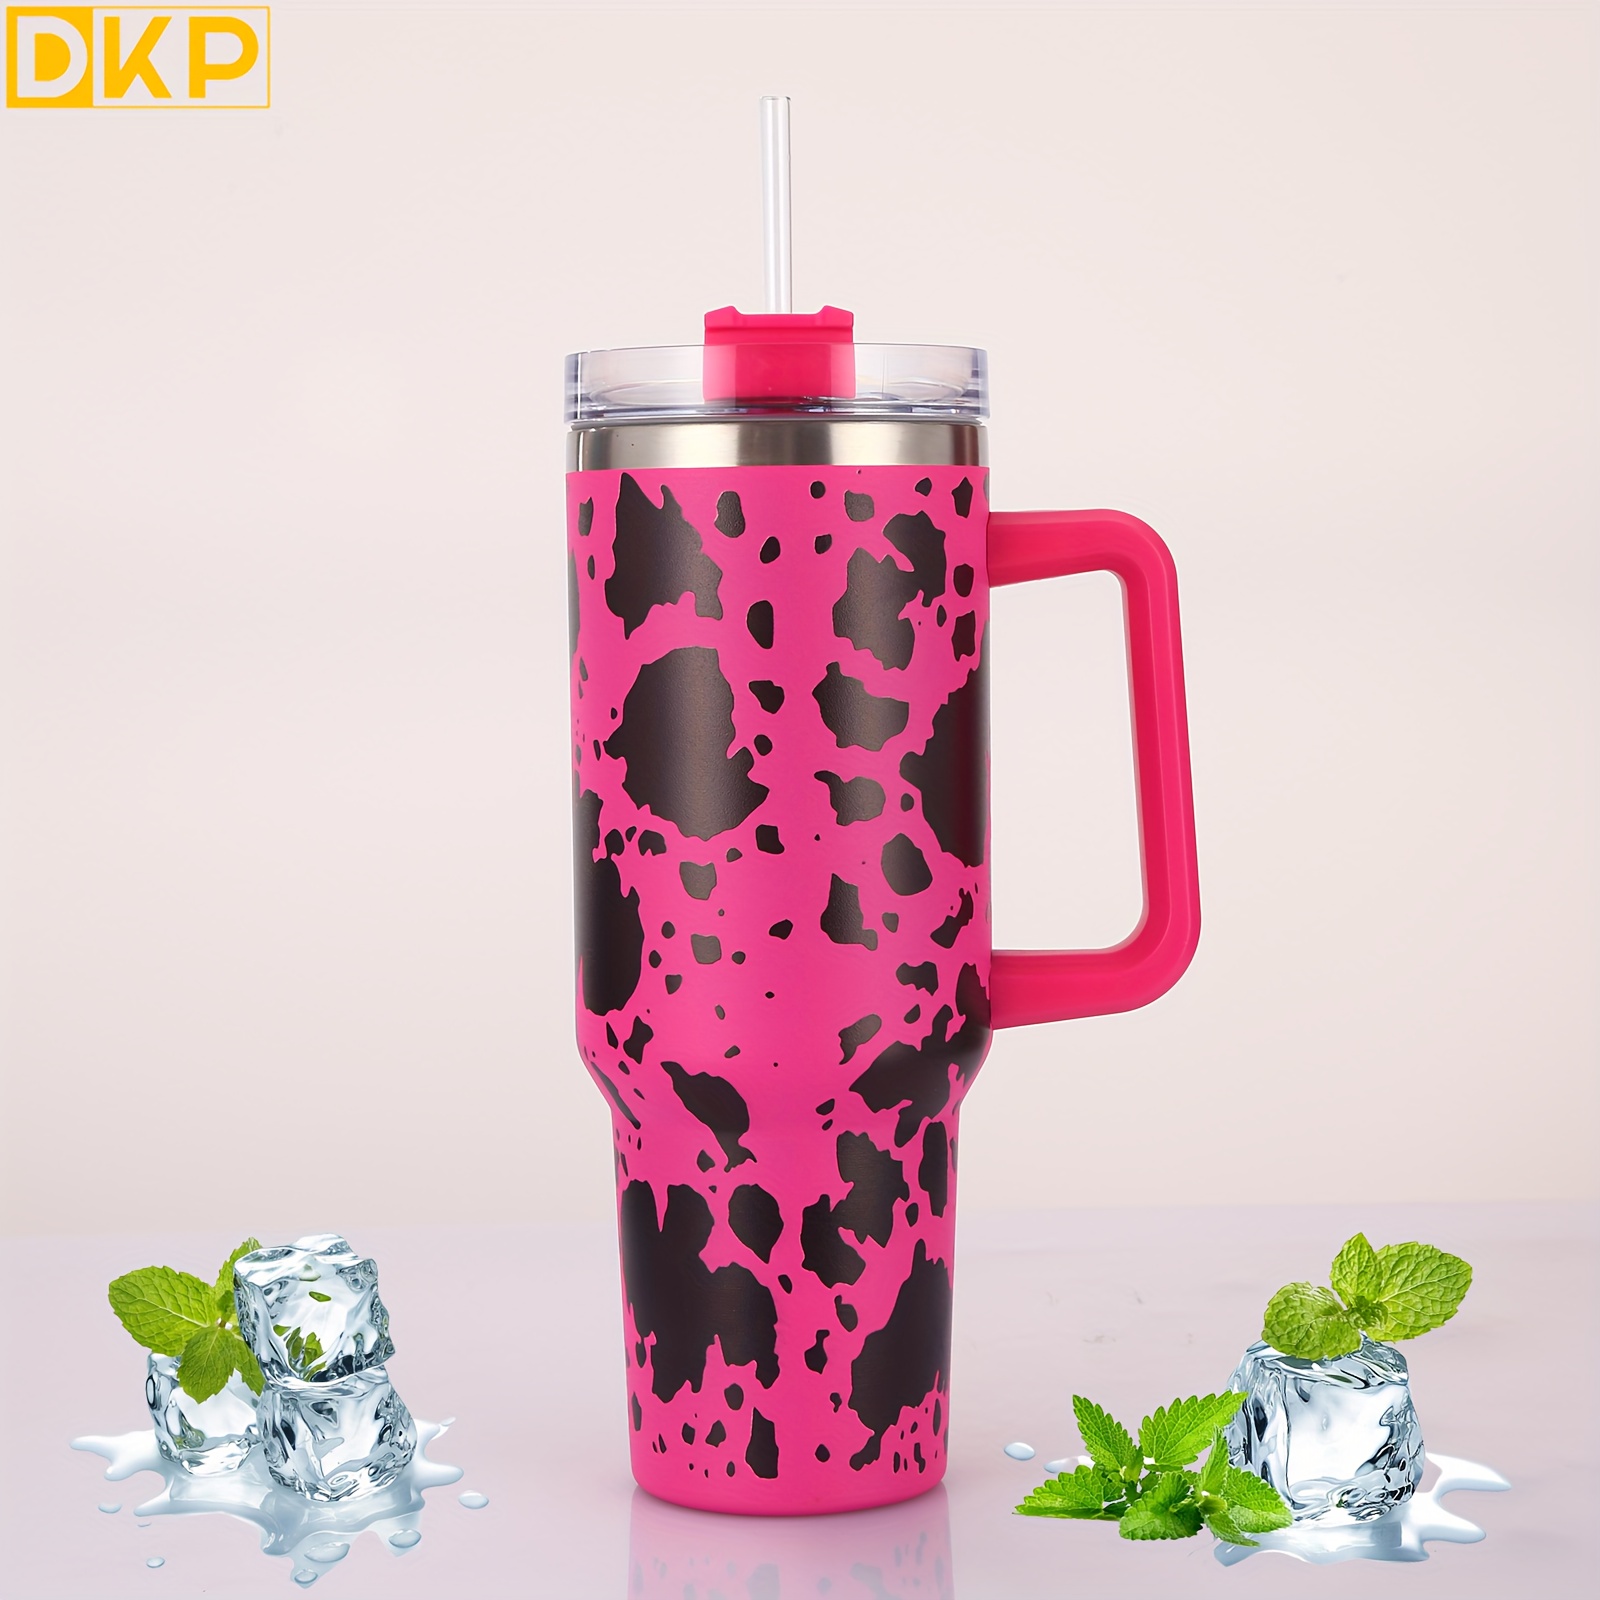 Black/White Cow Print Insulated Tumbler Cup with Handle